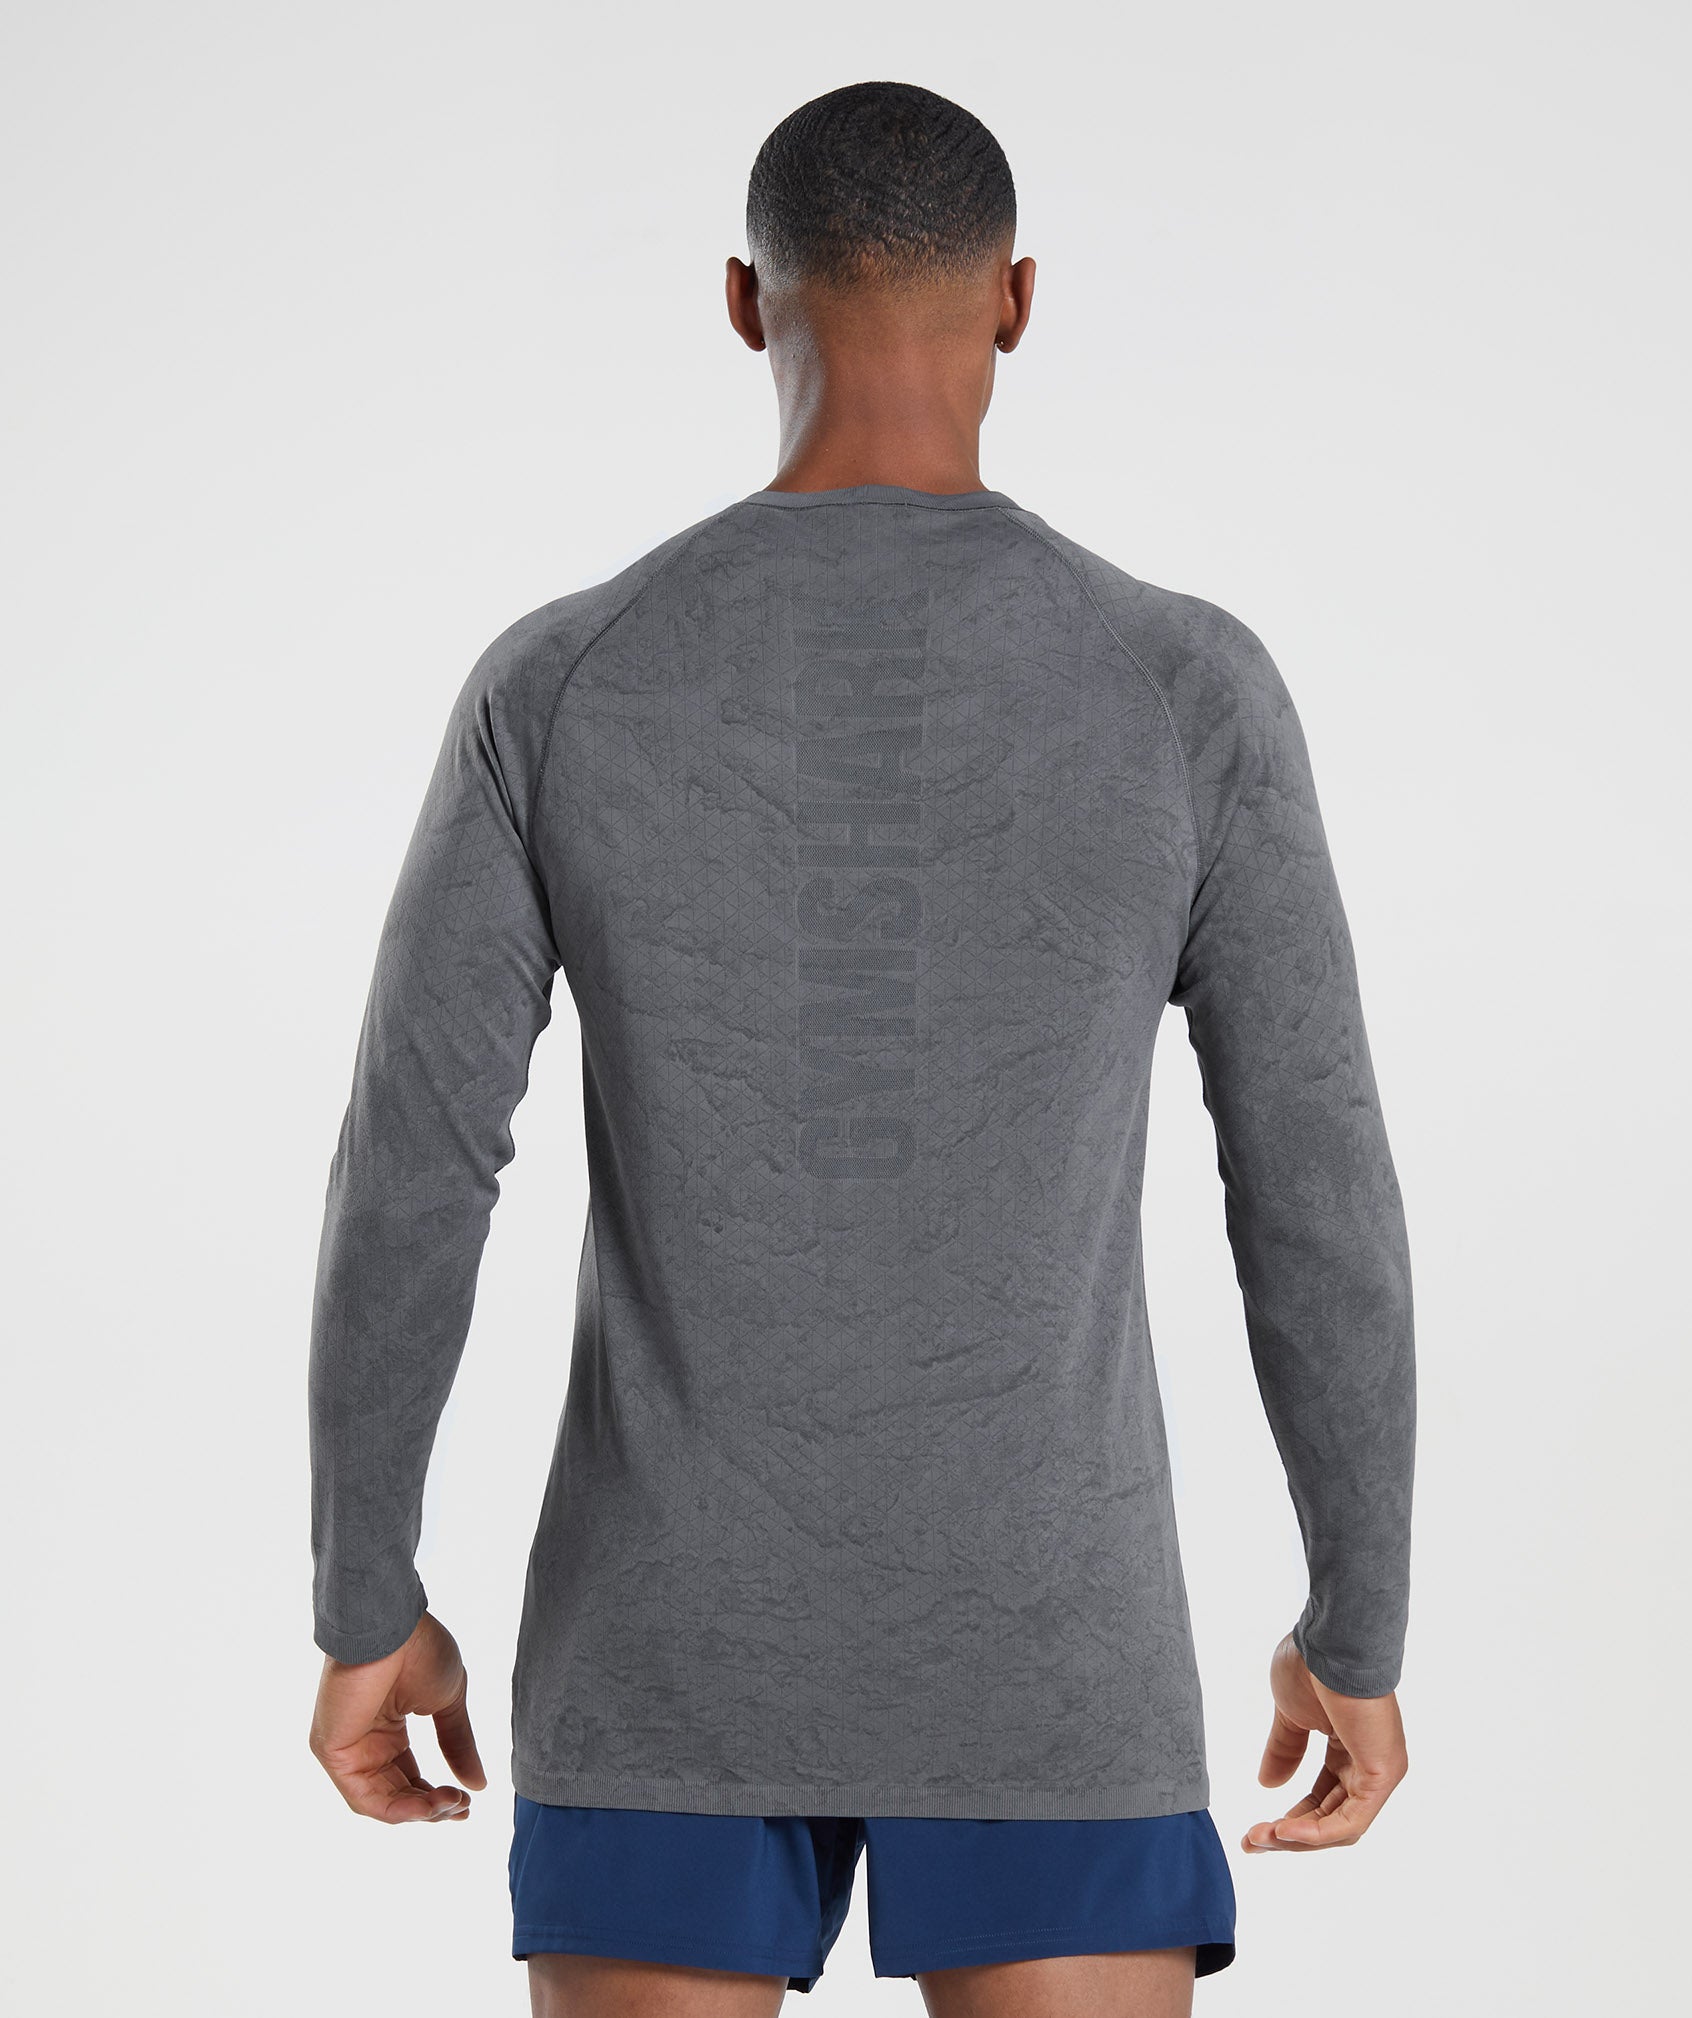 Geo Seamless Long Sleeve T-Shirt in Charcoal Grey/Black - view 1